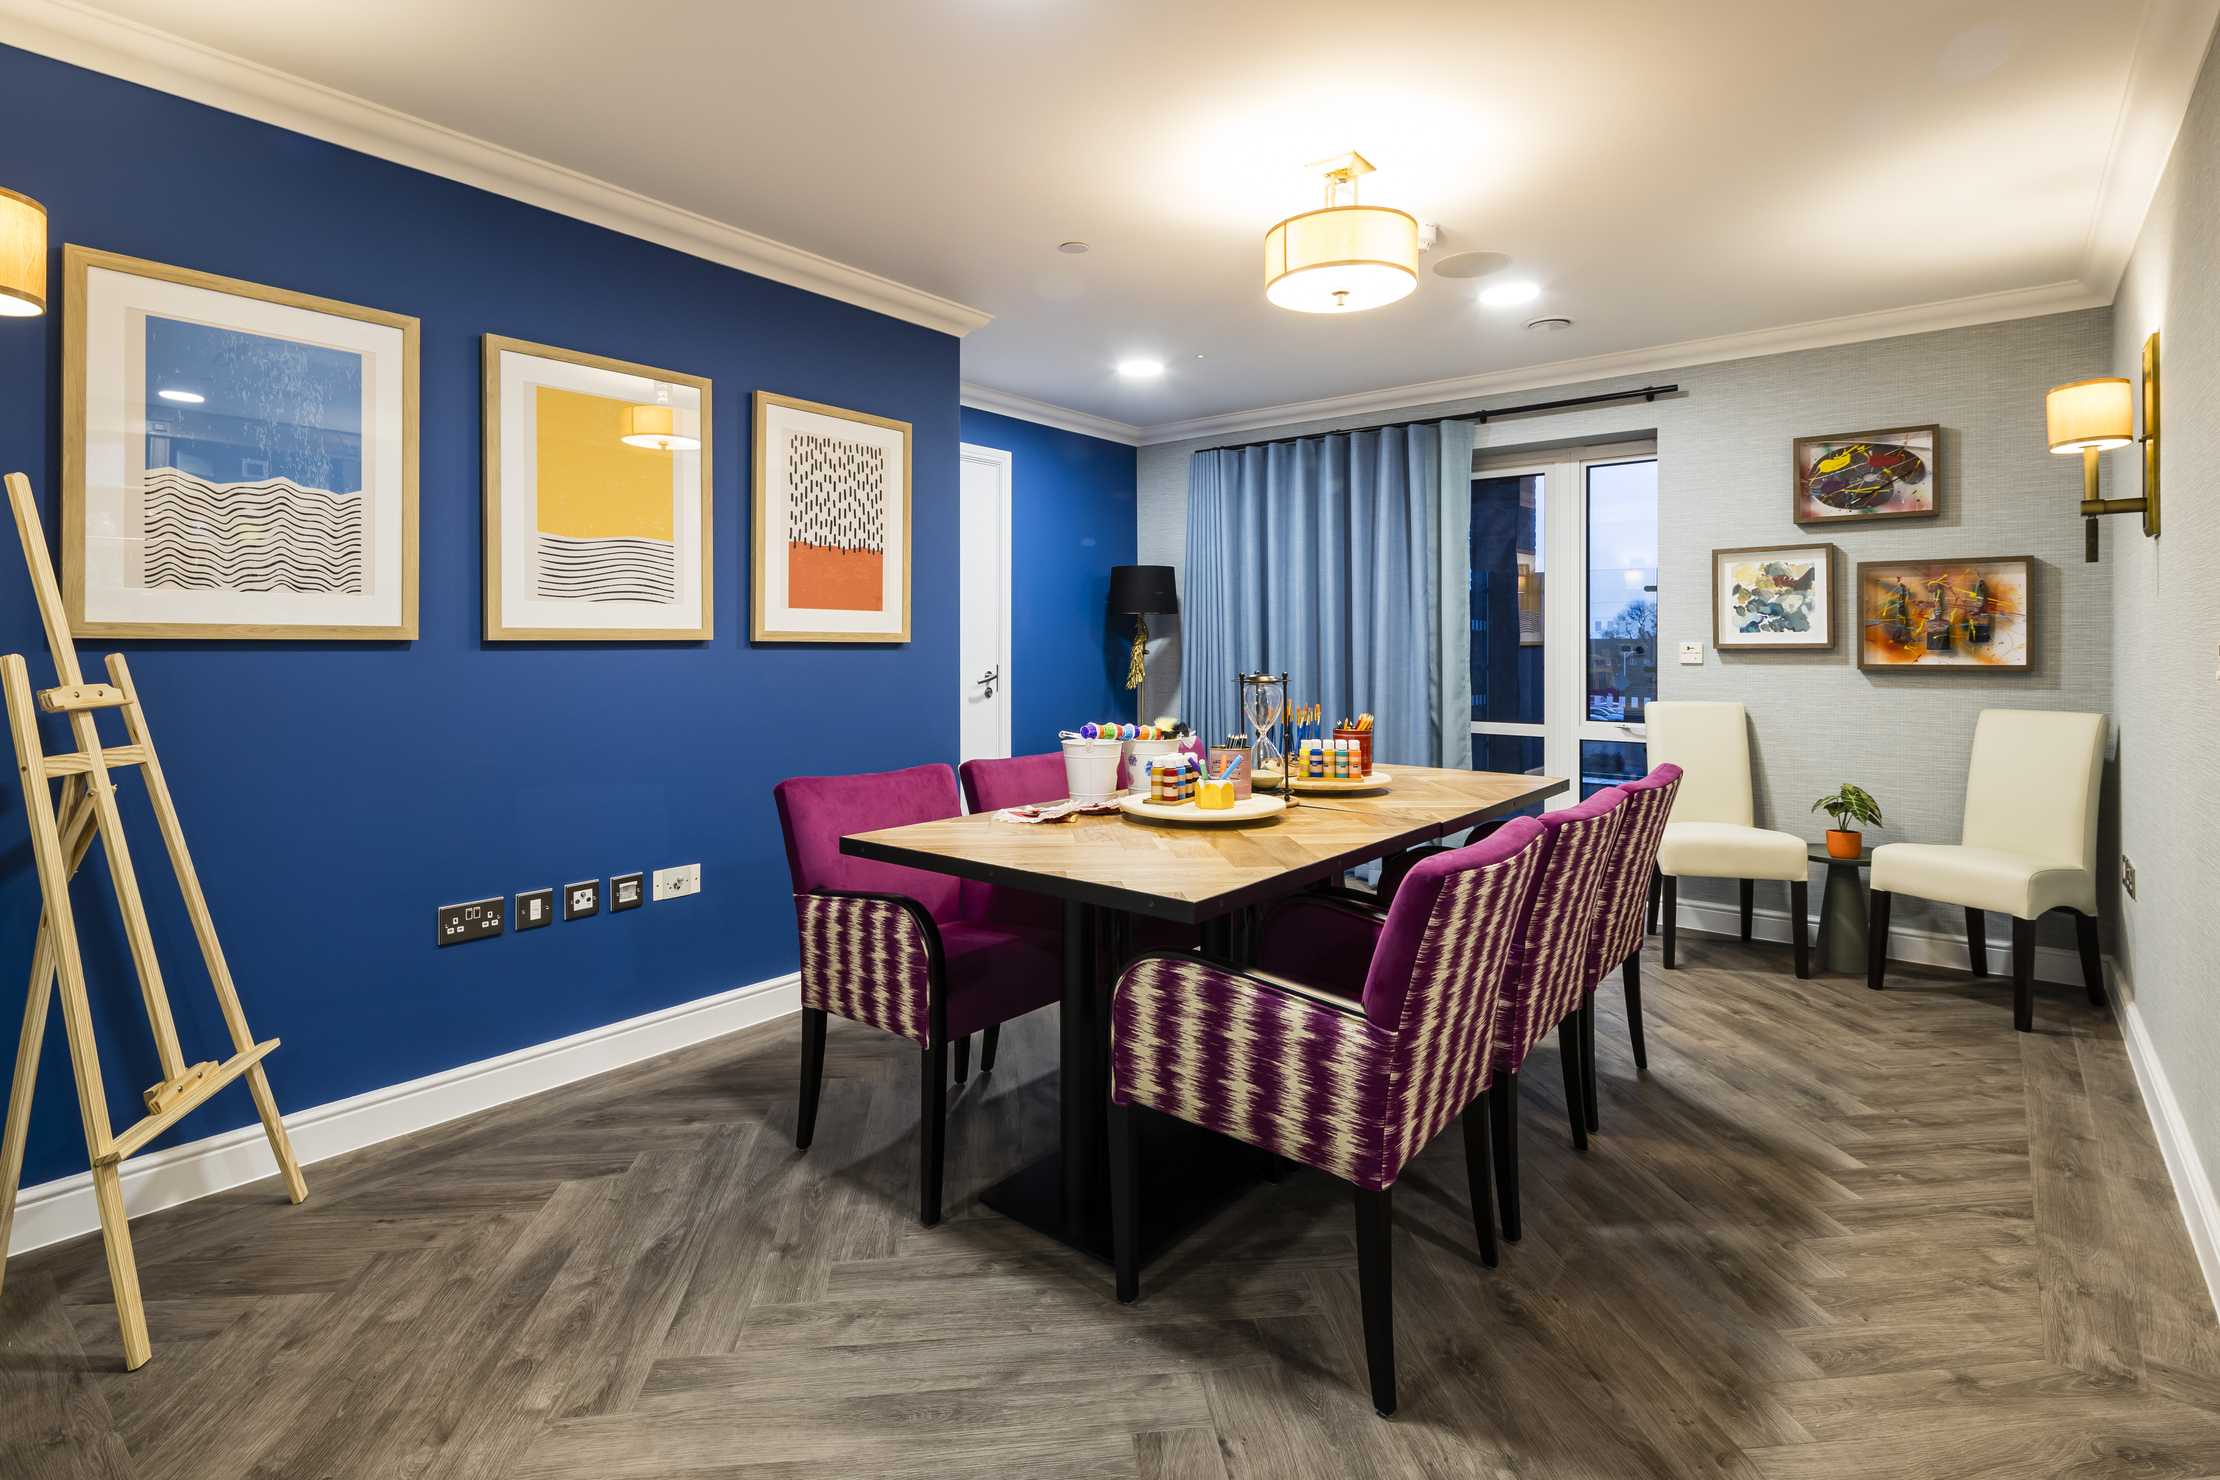 The Bridge Care Home dining room